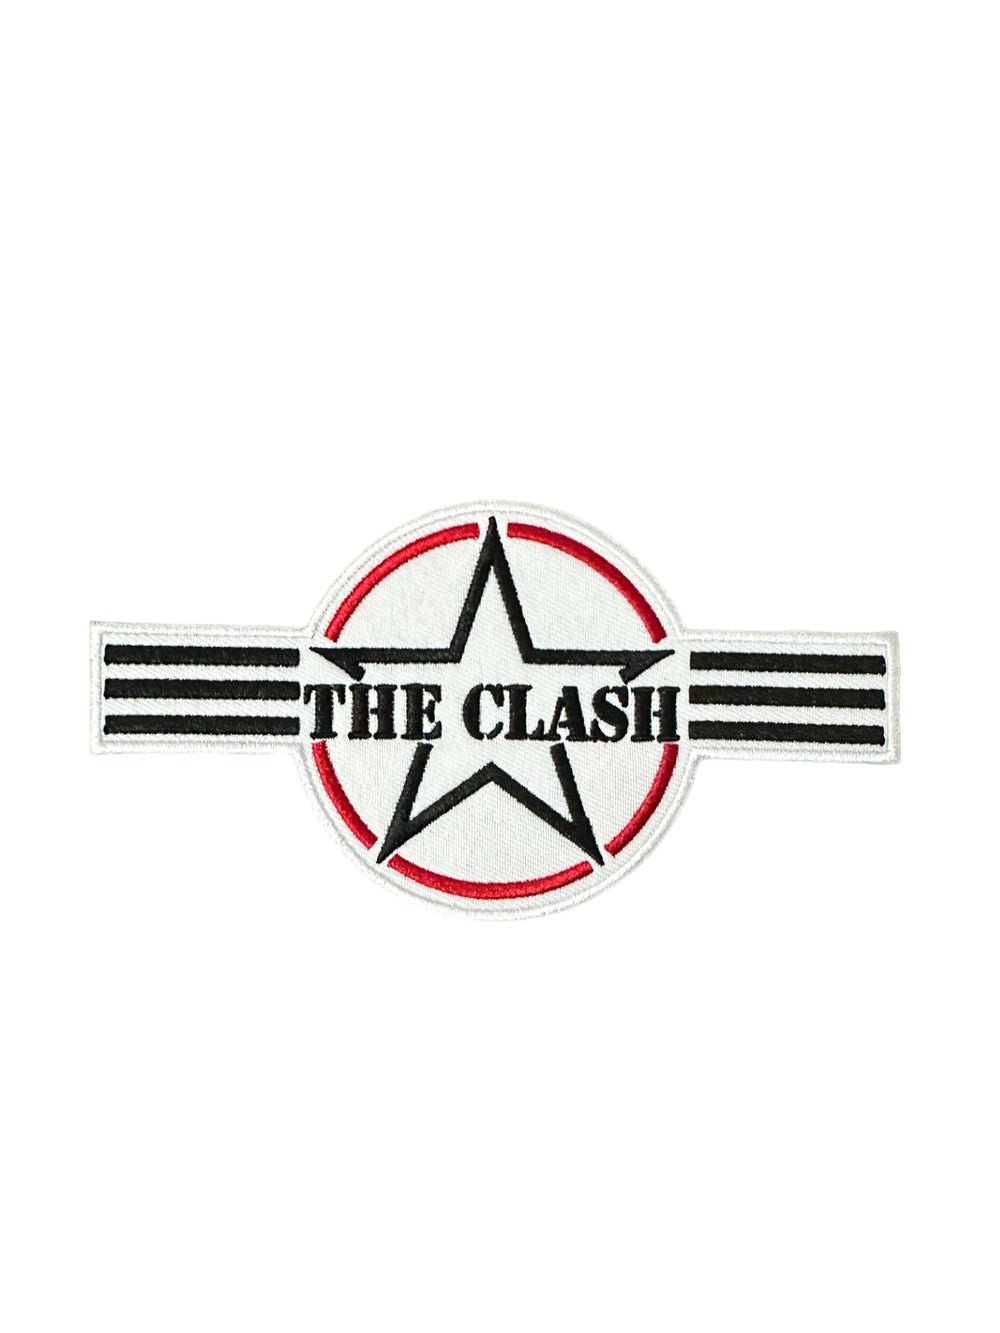 Clash Army Stripes Official Woven Patch Brand New